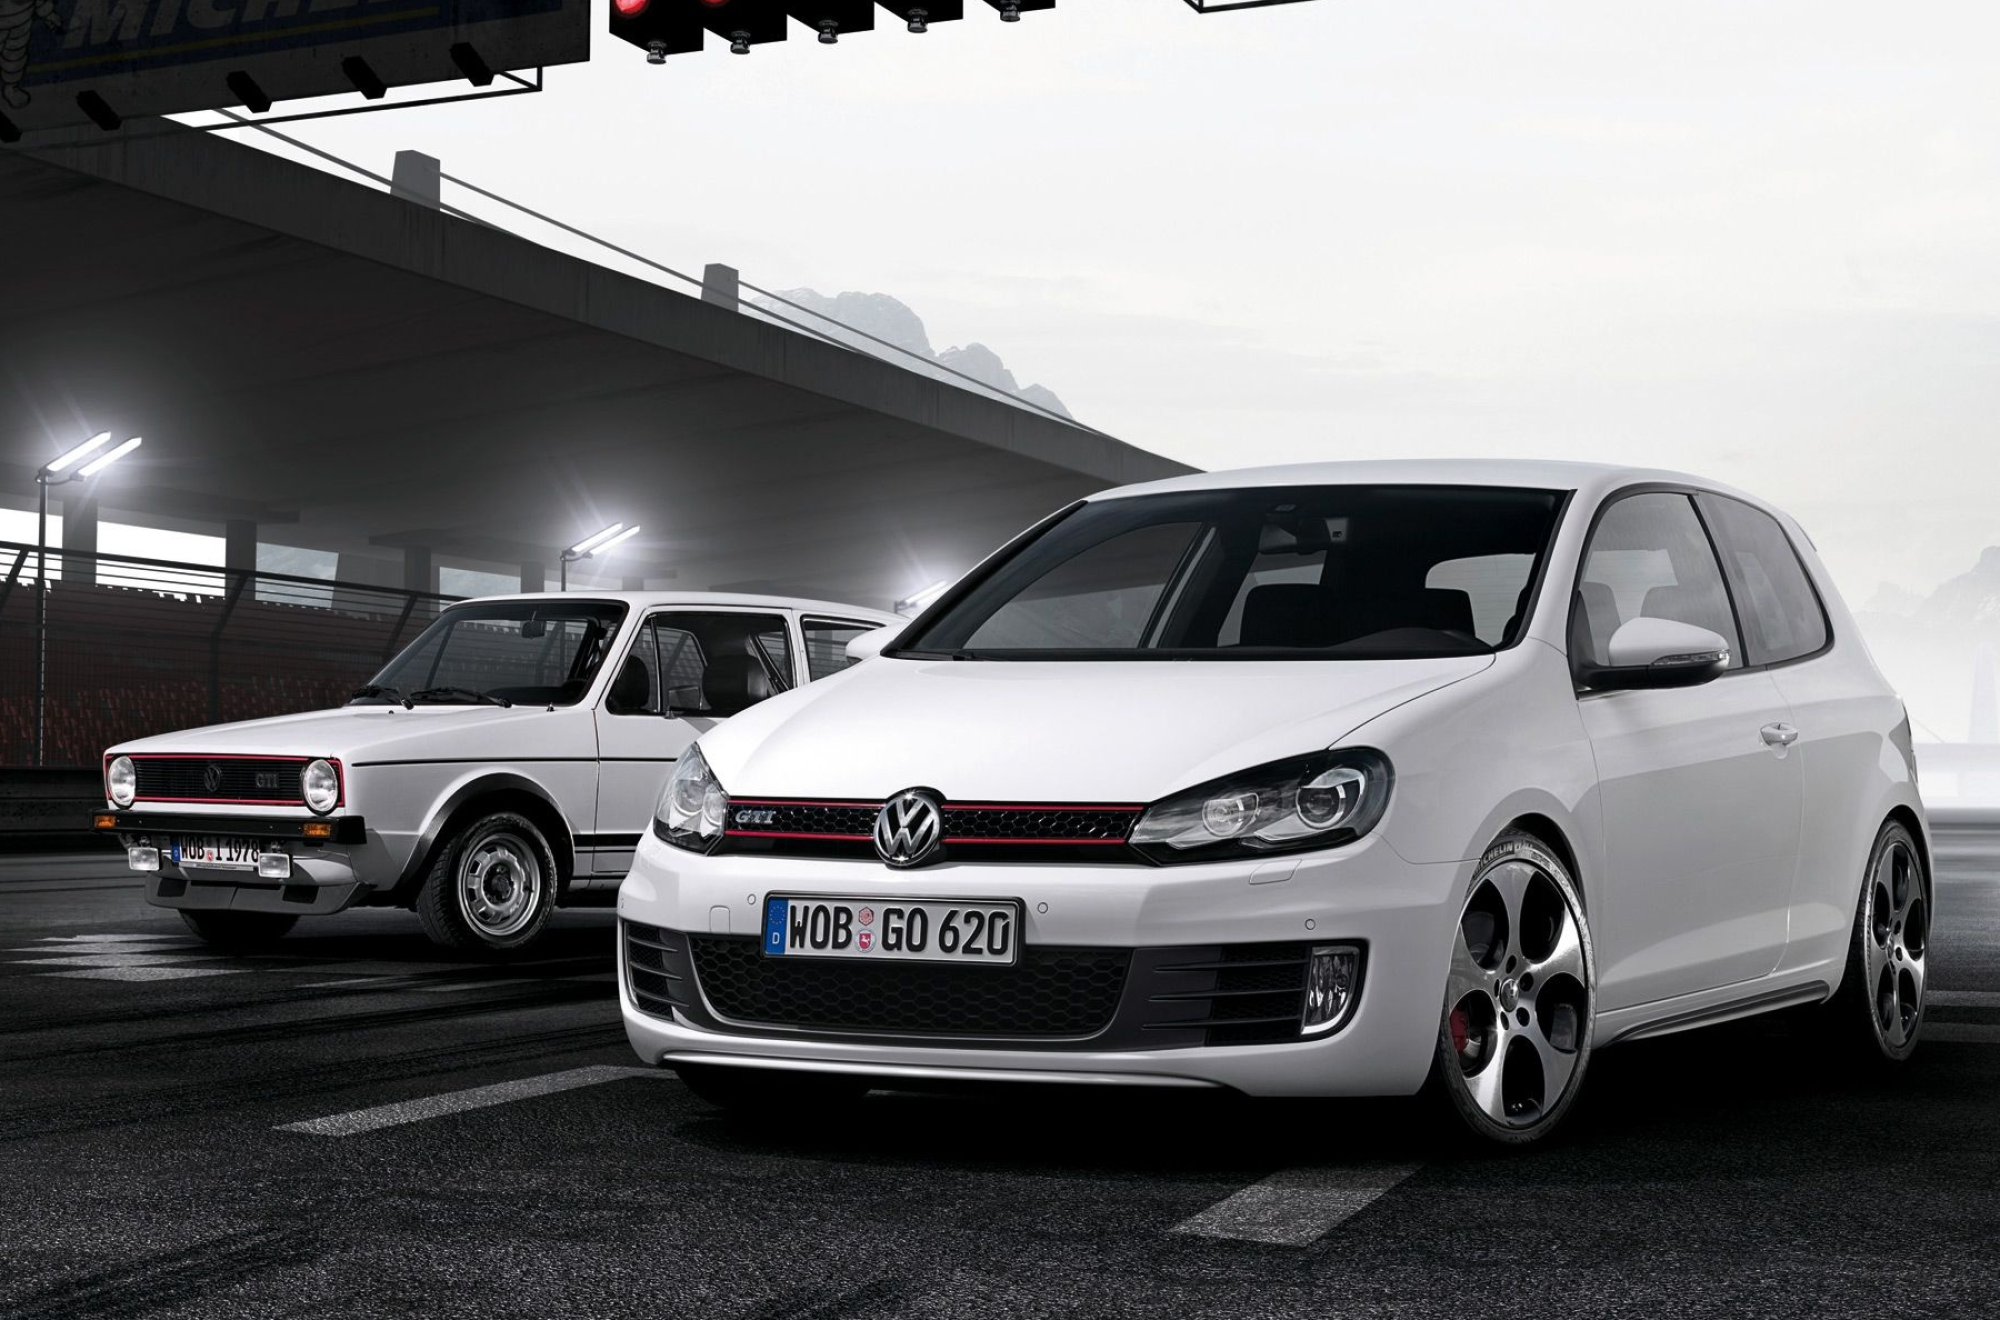 Volkswagen Golf, GTI edition, Performance vehicle, Exciting driving experience, 2000x1320 HD Desktop